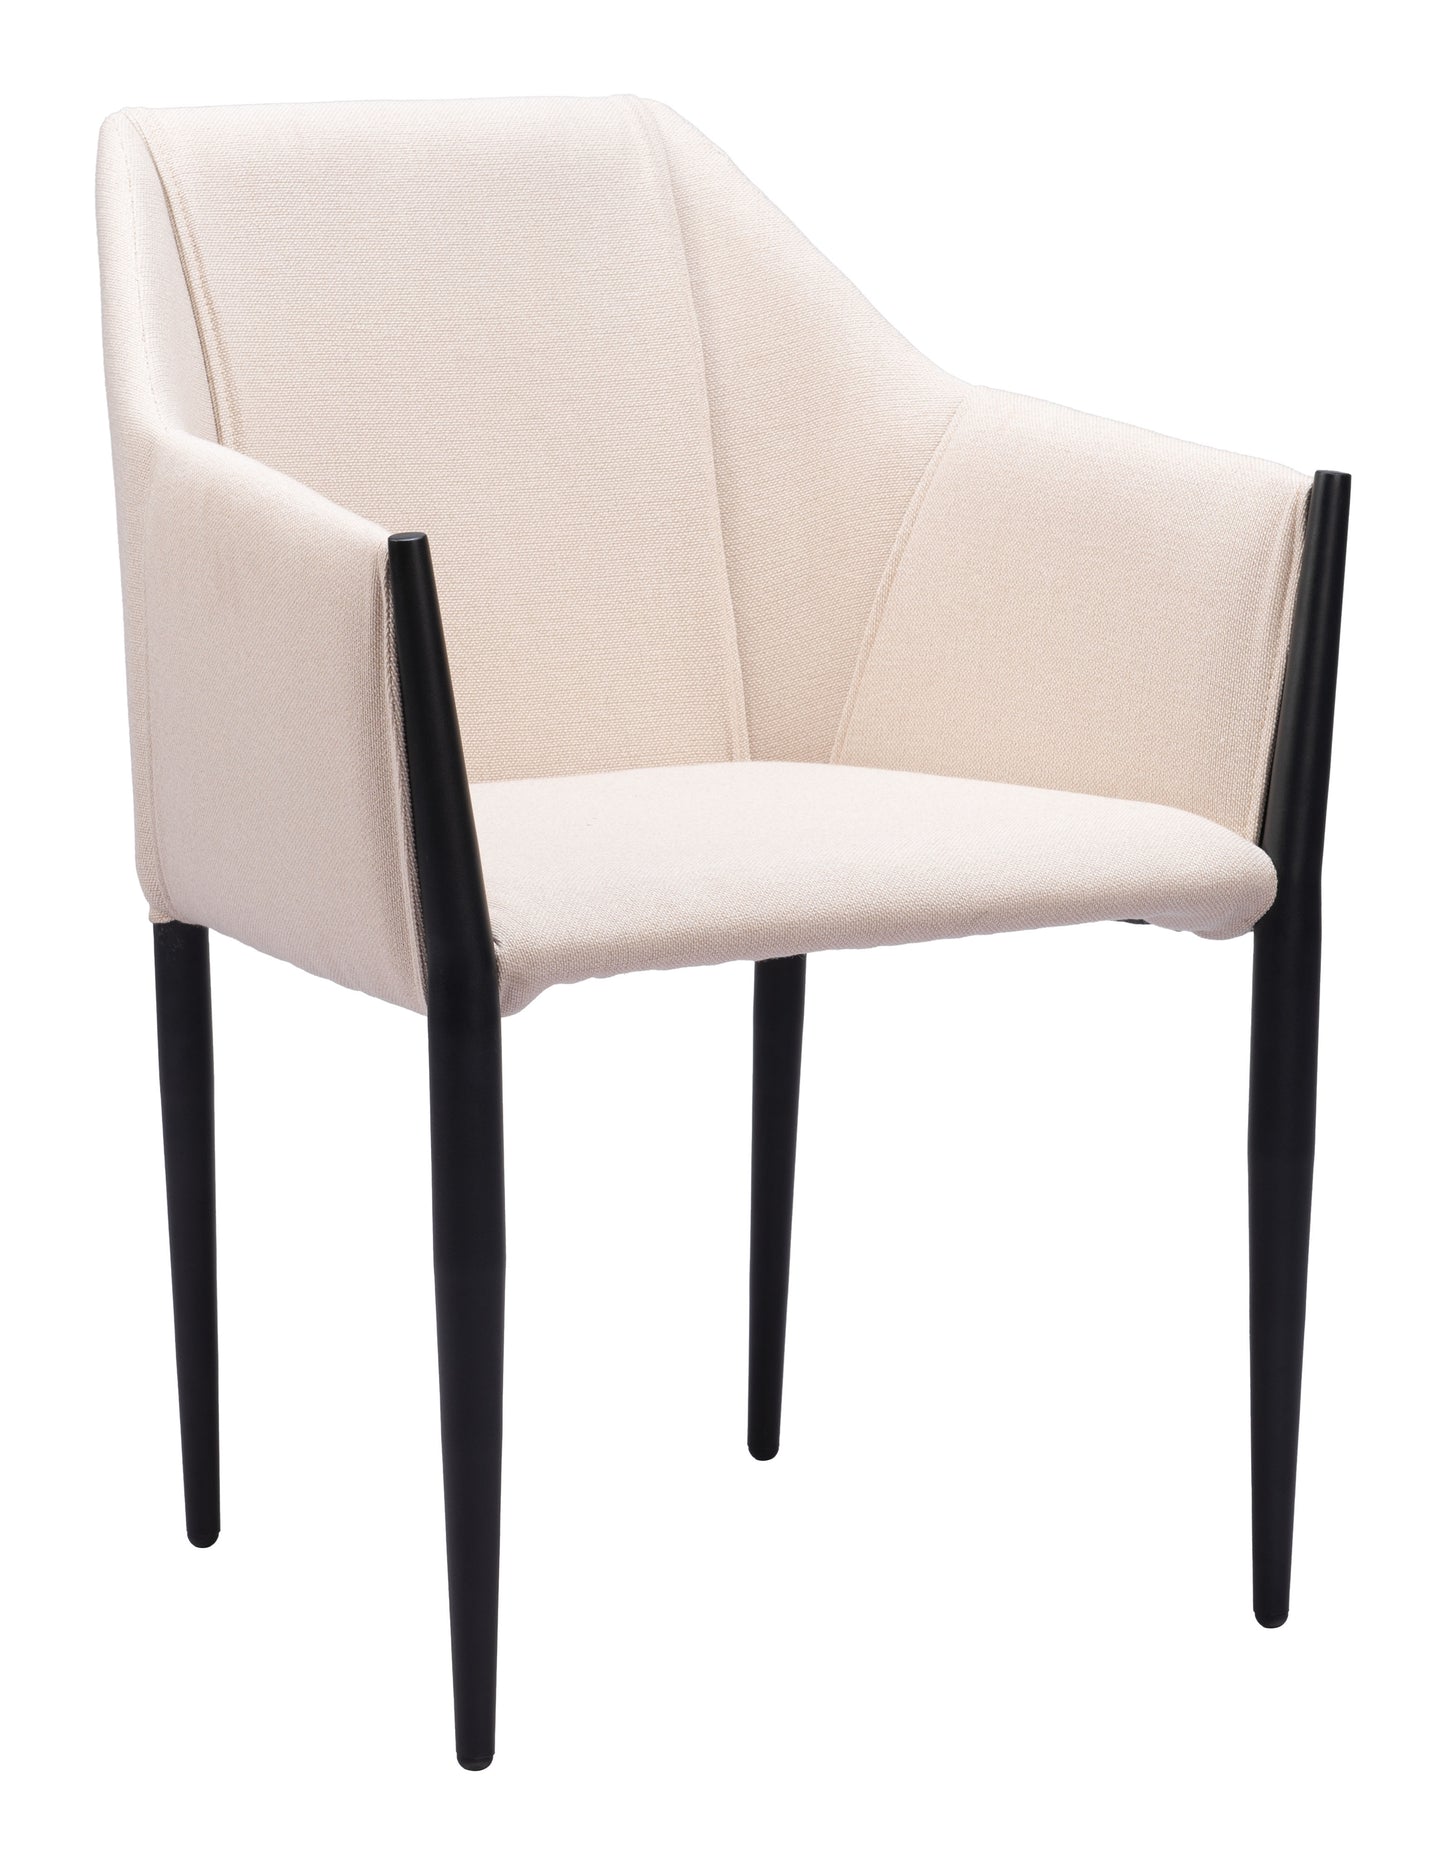 Andover Dining Chair (Set of 2) Beige